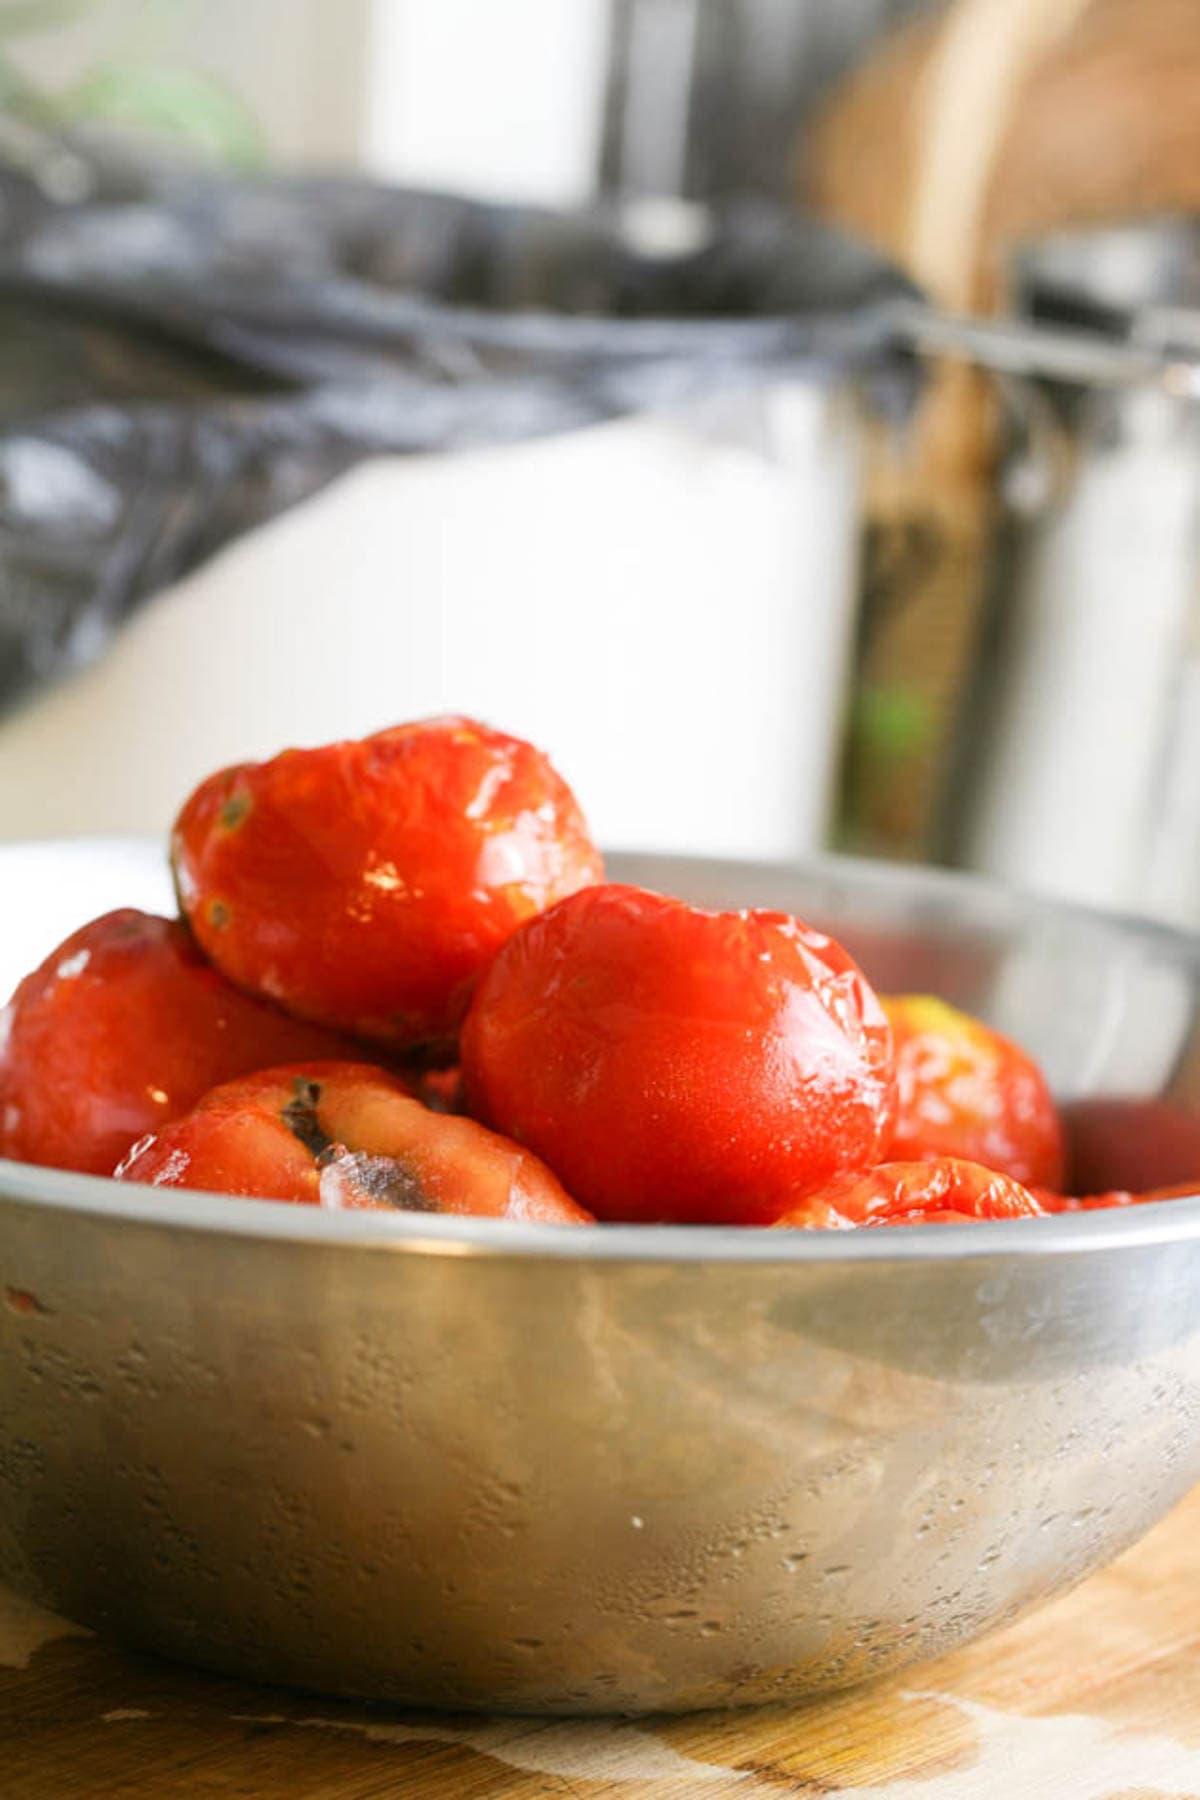 Thawed frozen tomatoes